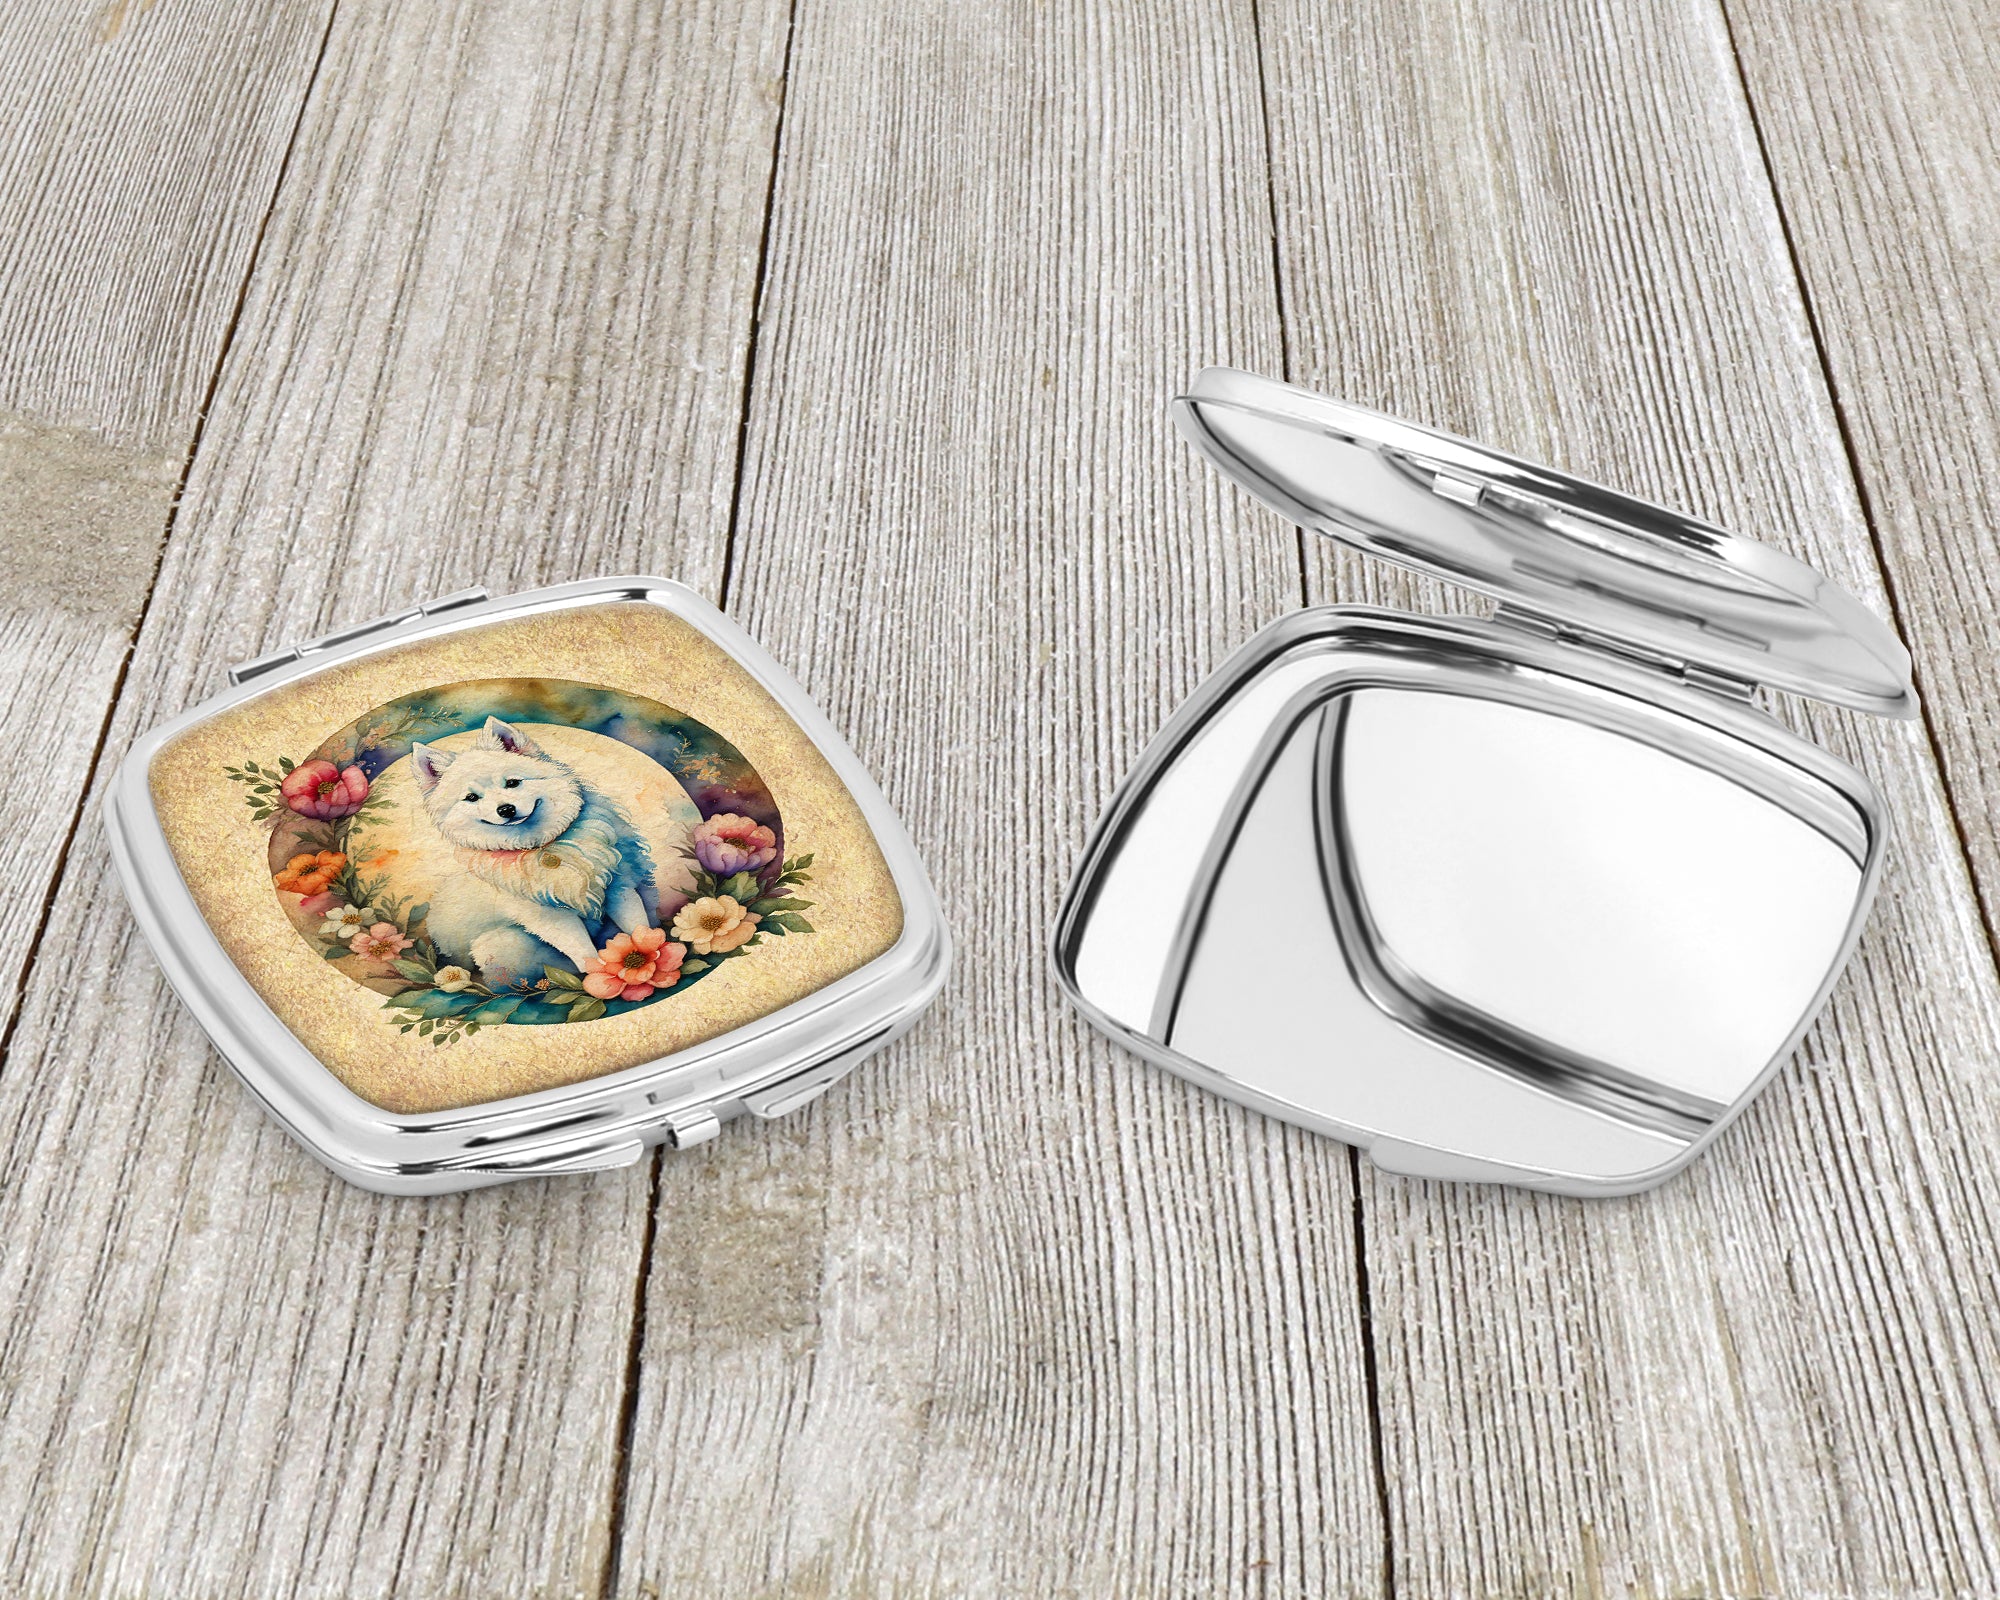 American Eskimo and Flowers Compact Mirror